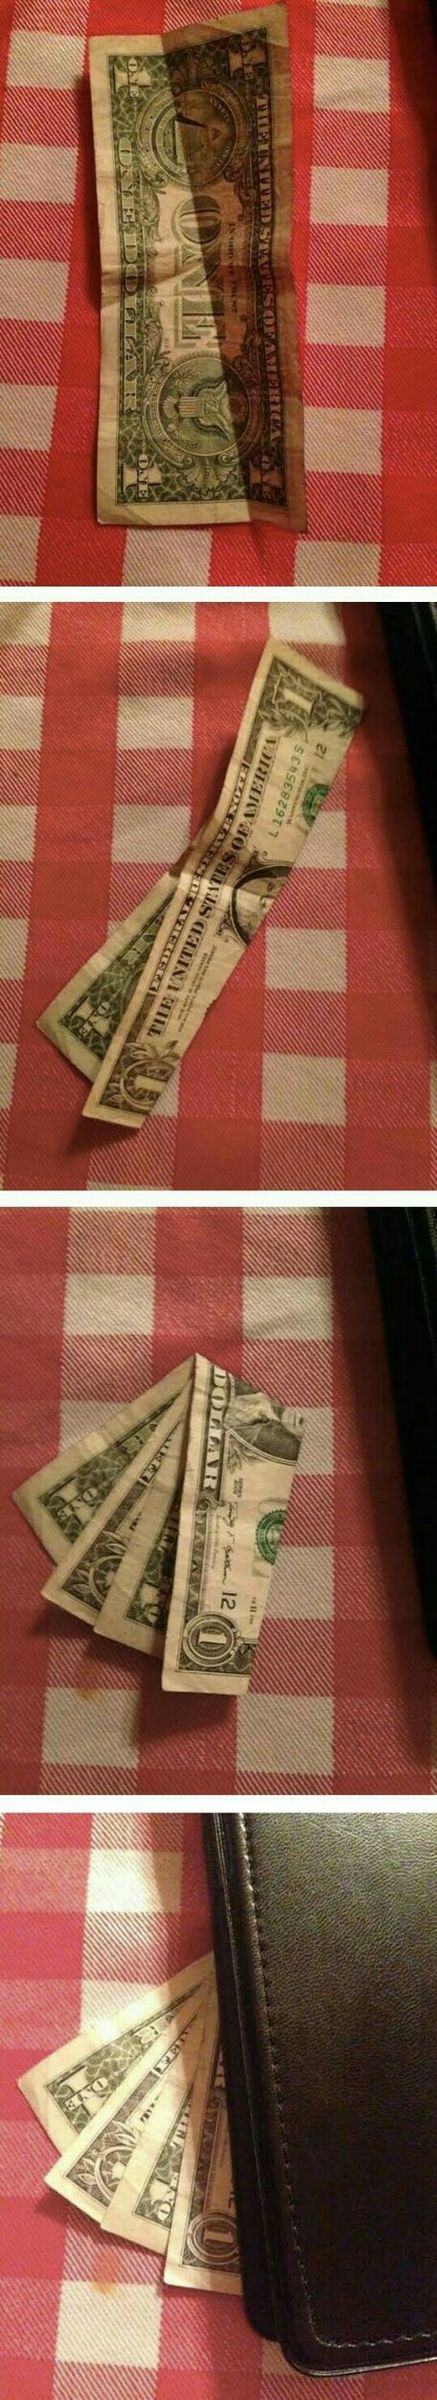 Little trick for frugal tippers or when you get shitty service - meme